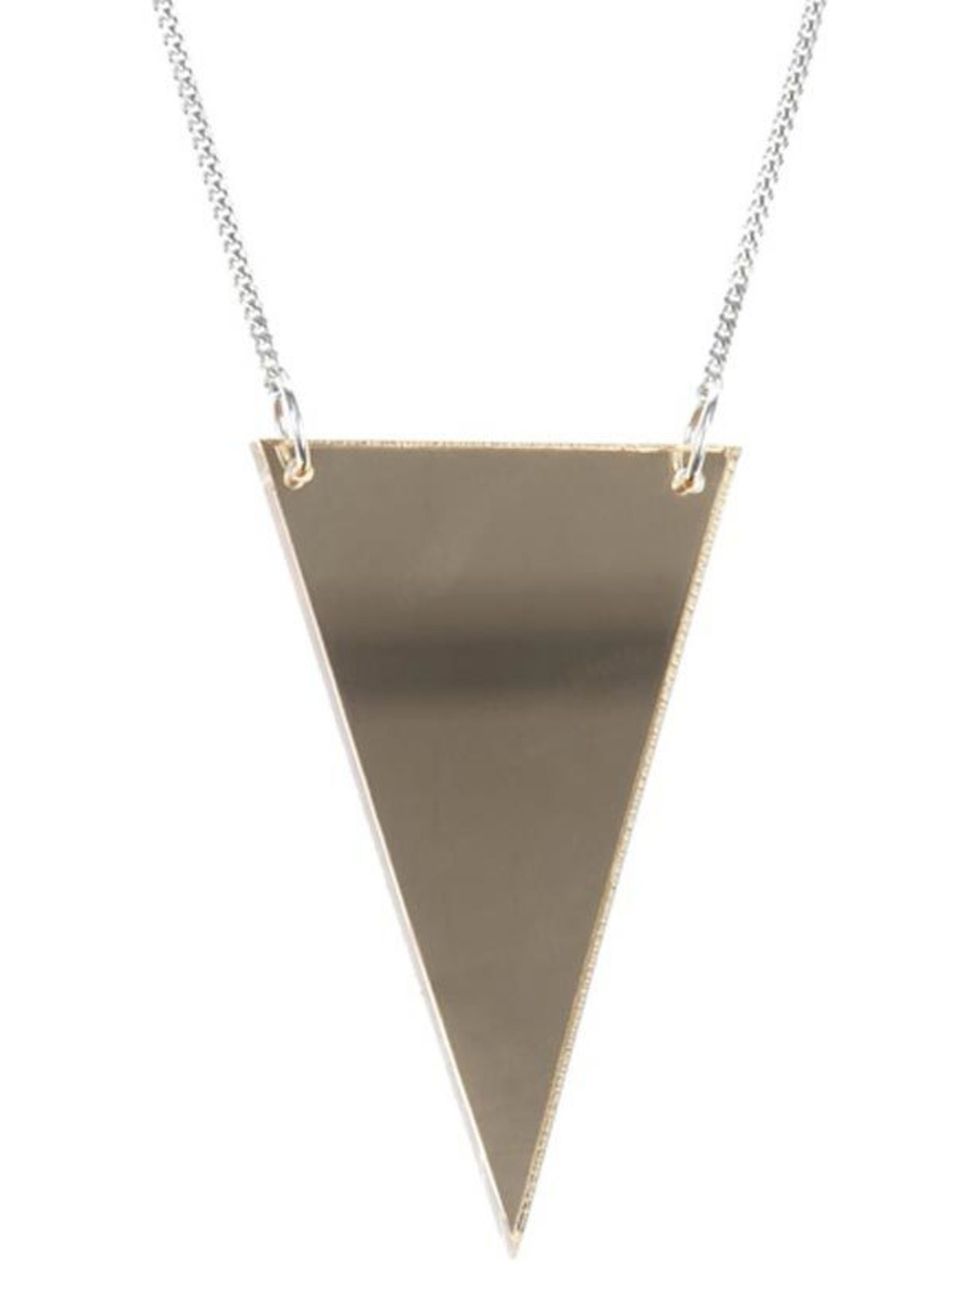 <p> </p><p> </p><p>Worn with a chunky knit, plain T-shirt or LBD, this sleek geometric necklace will give a subtle, luxe edge to just about anything. Lucy Peacock triangular newcklace, £52, at <a href="http://www.no-one.co.uk/shopping/women/search/schid-6